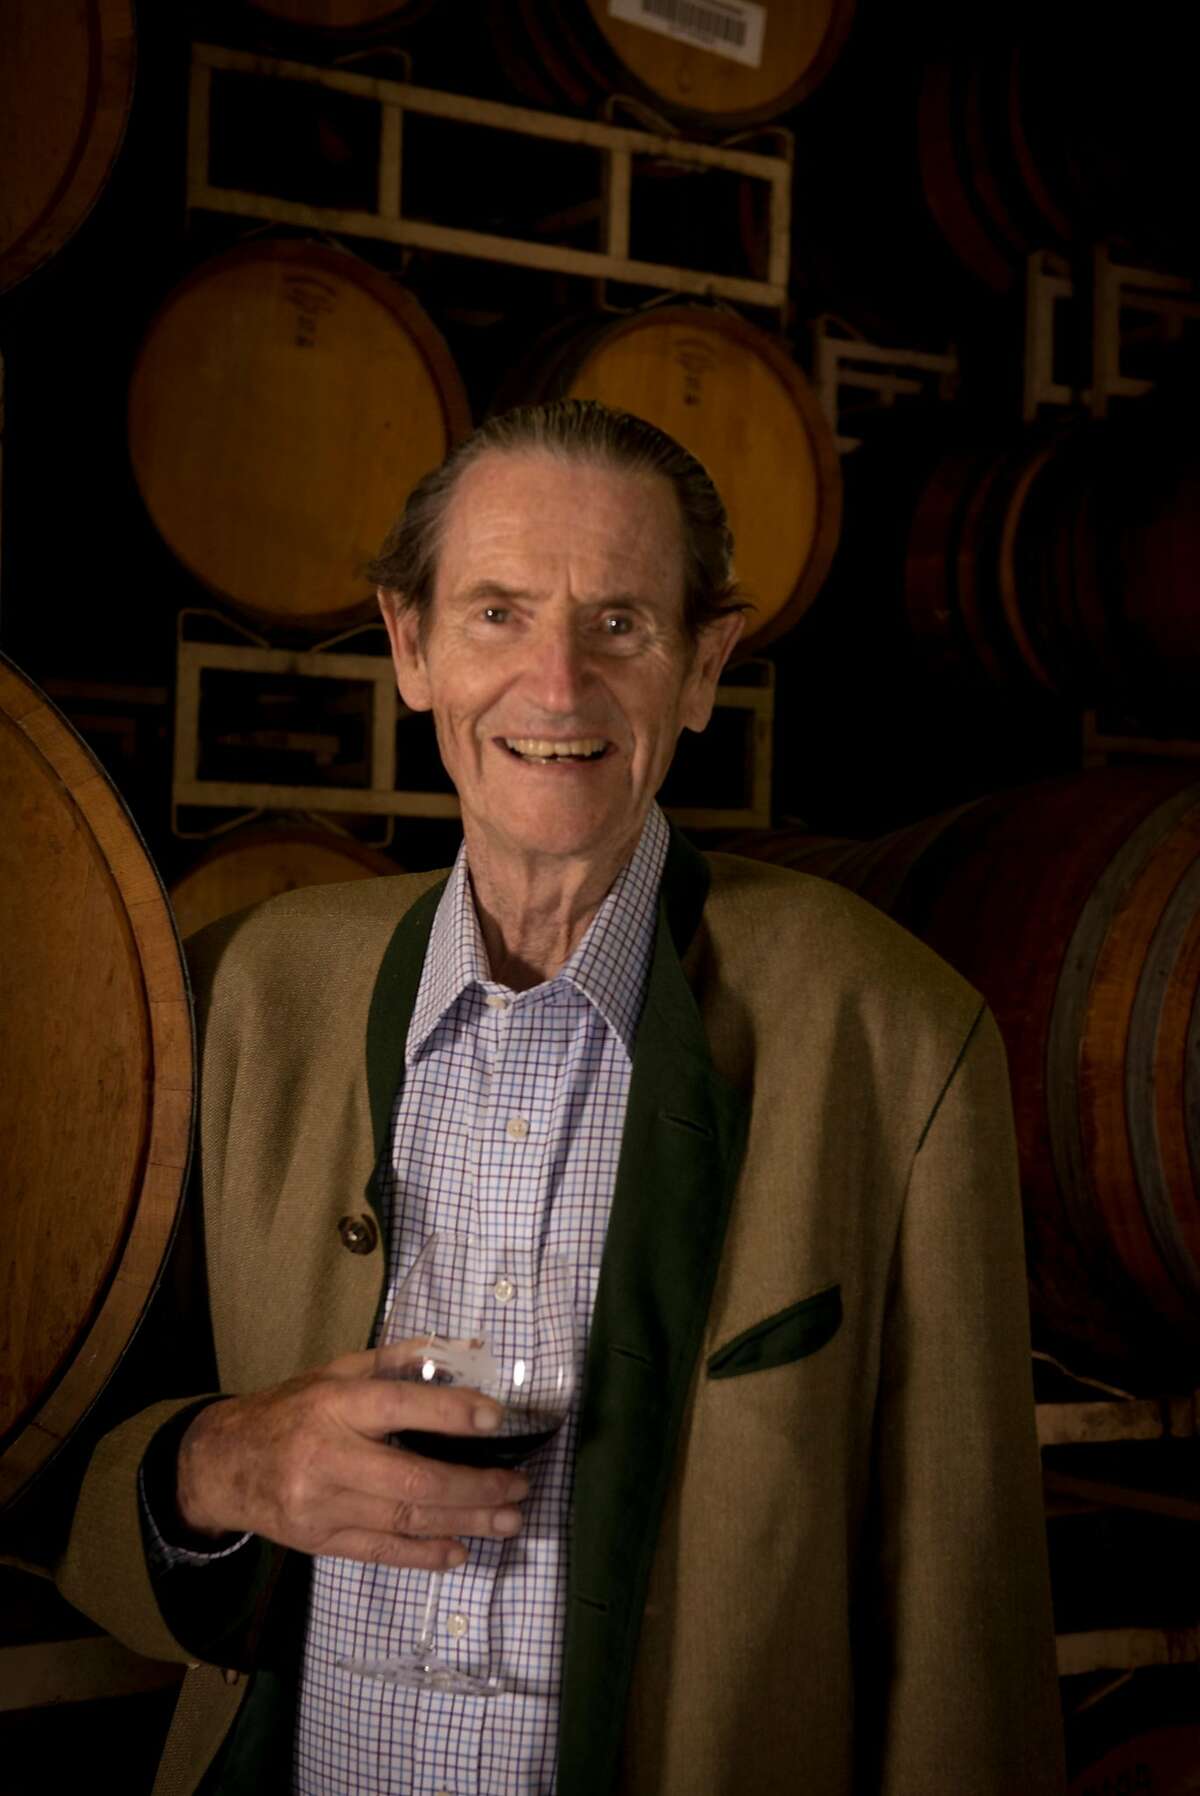 Nicky Hahn, founder of Hahn Family Wines in the Santa Lucia Highlands, has died at age 81